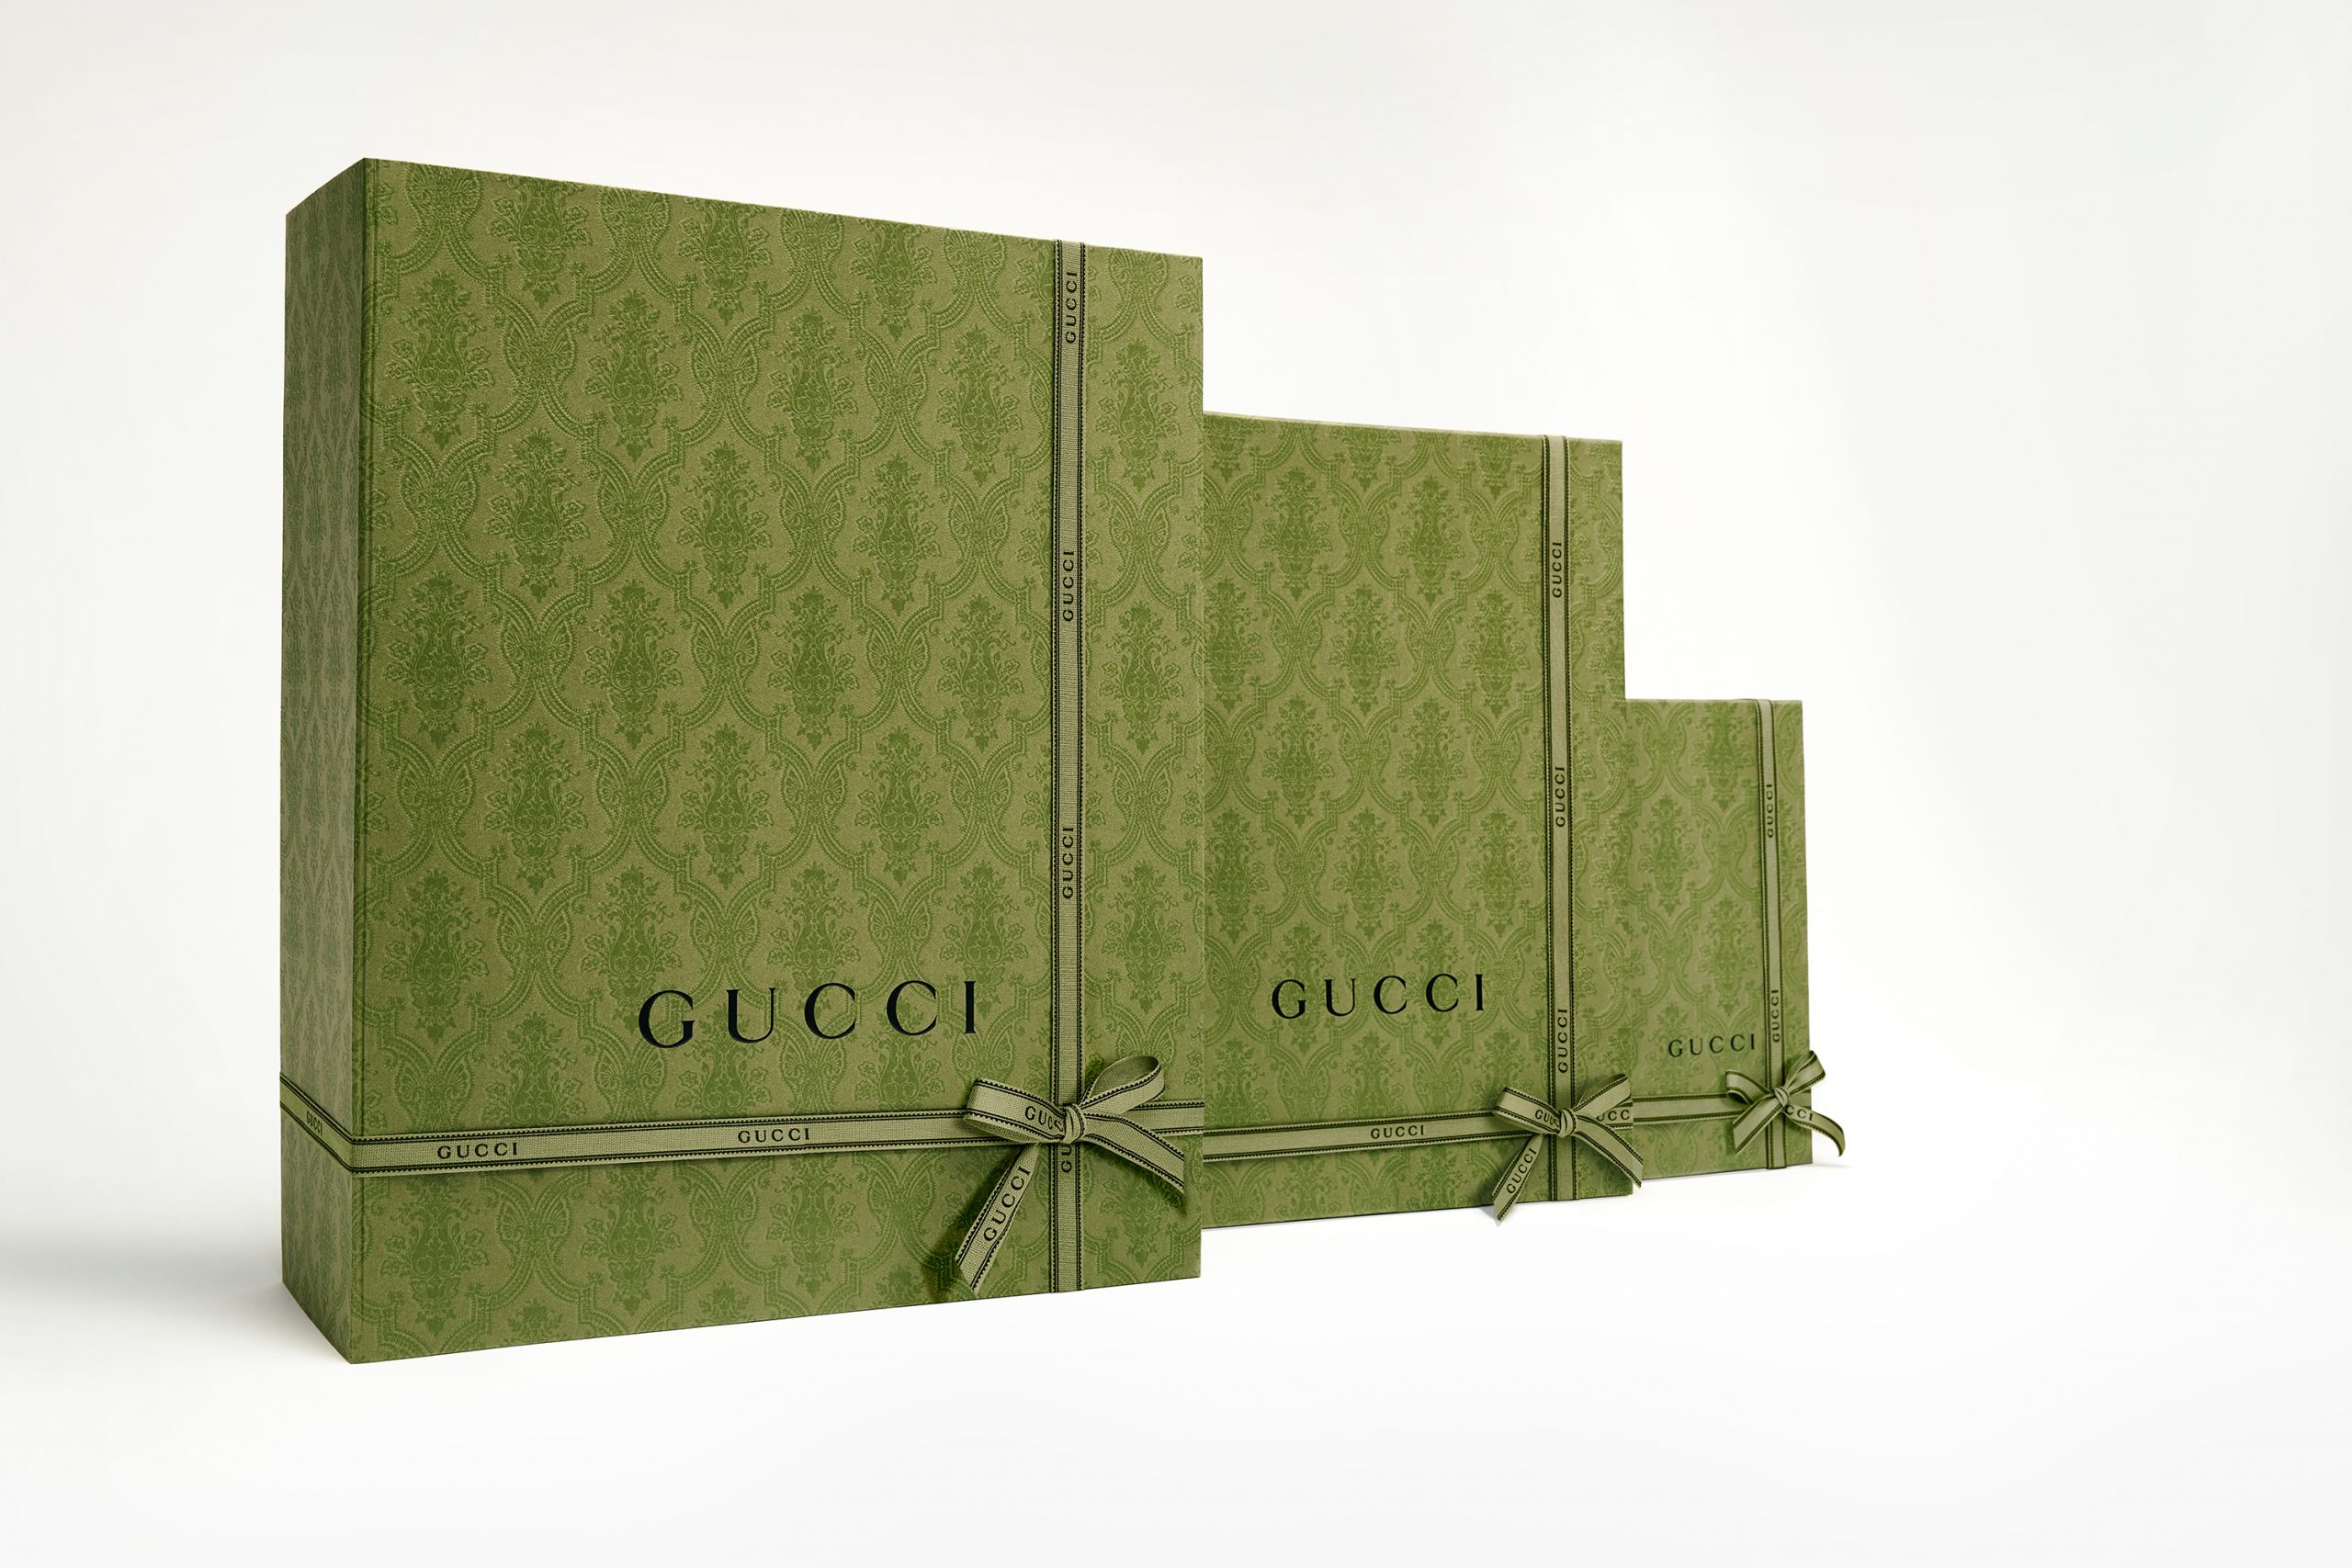 Gucci Launches Biodegradable Packaging 